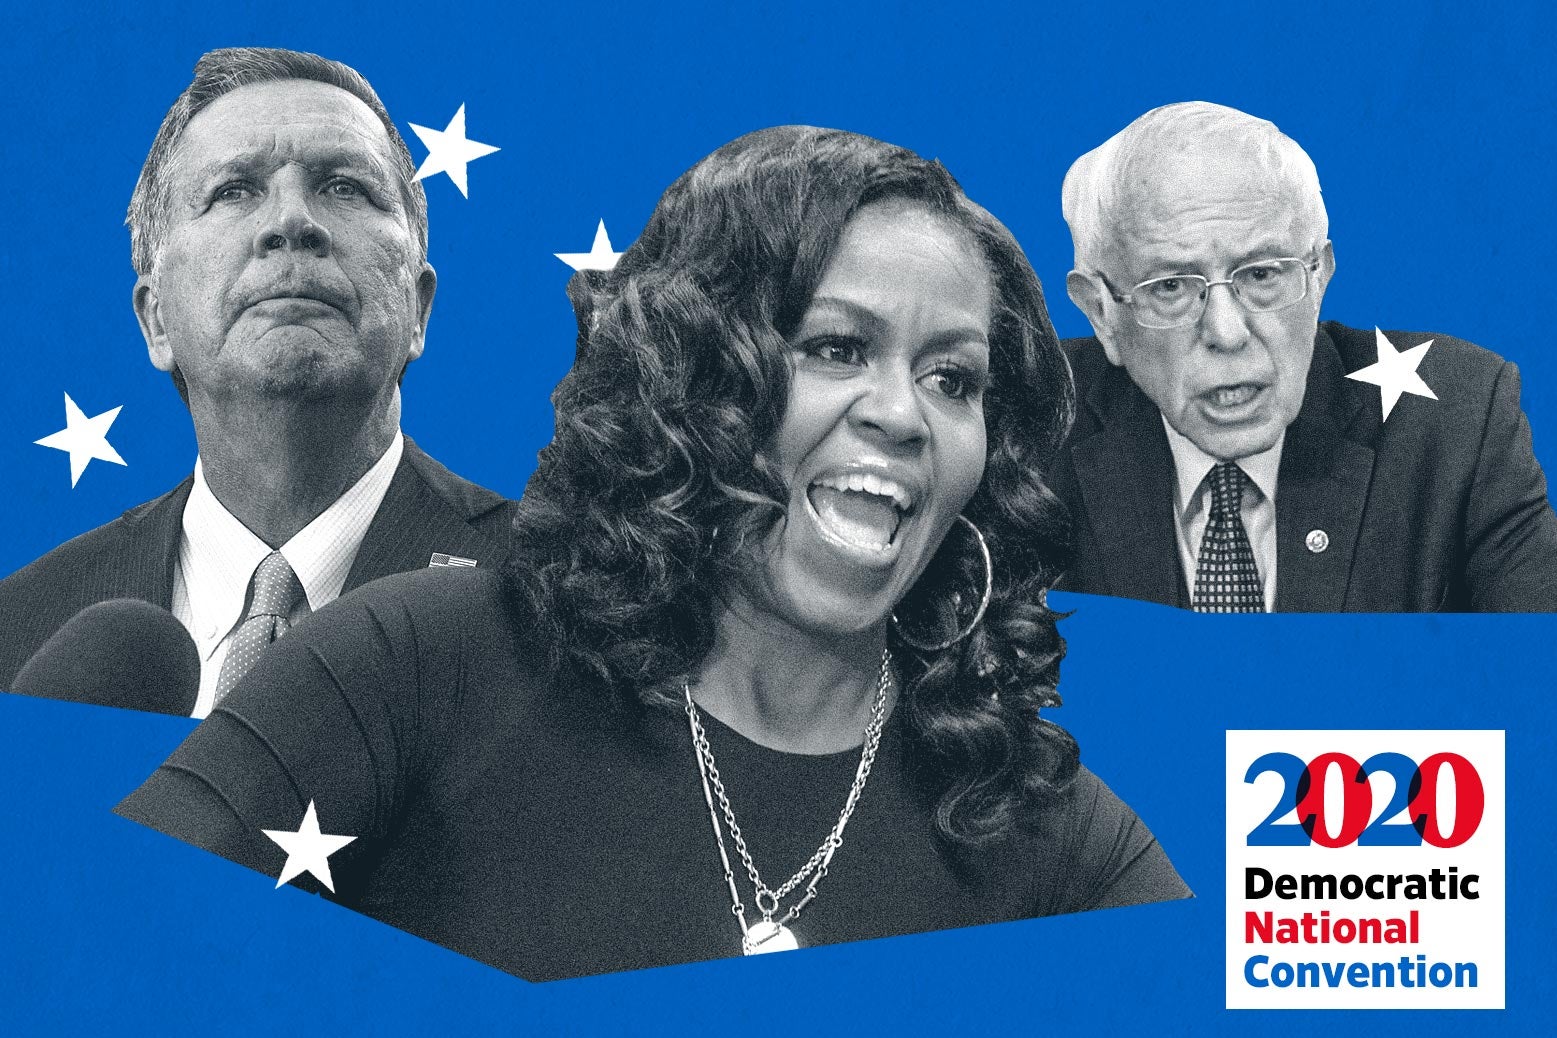 From left to right: John Kasich's floating head, Michelle Obama's floating head, Bernie Sanders' floating head with a Democratic 2020 convention logo.